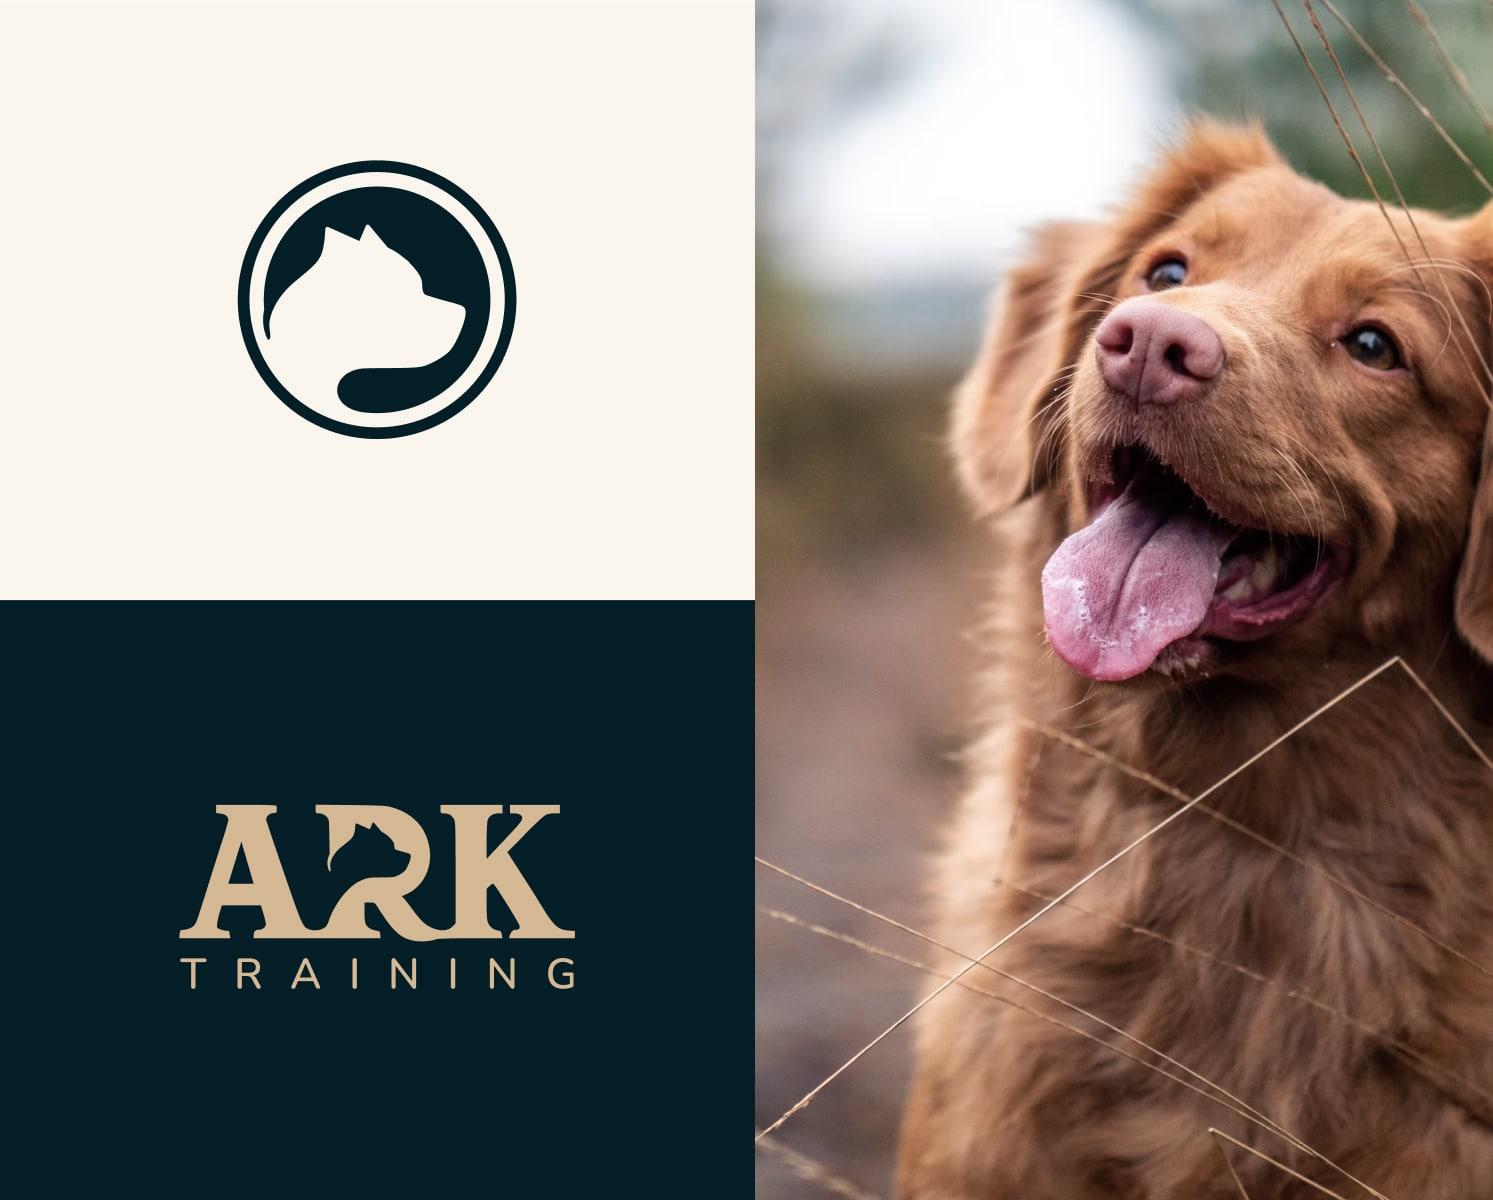 Elegant and simple dog training logo featuring a minimalist dog paw and leash design, symbolizing care and guidance. This logo is perfect for businesses aiming to communicate their professional dog training services.